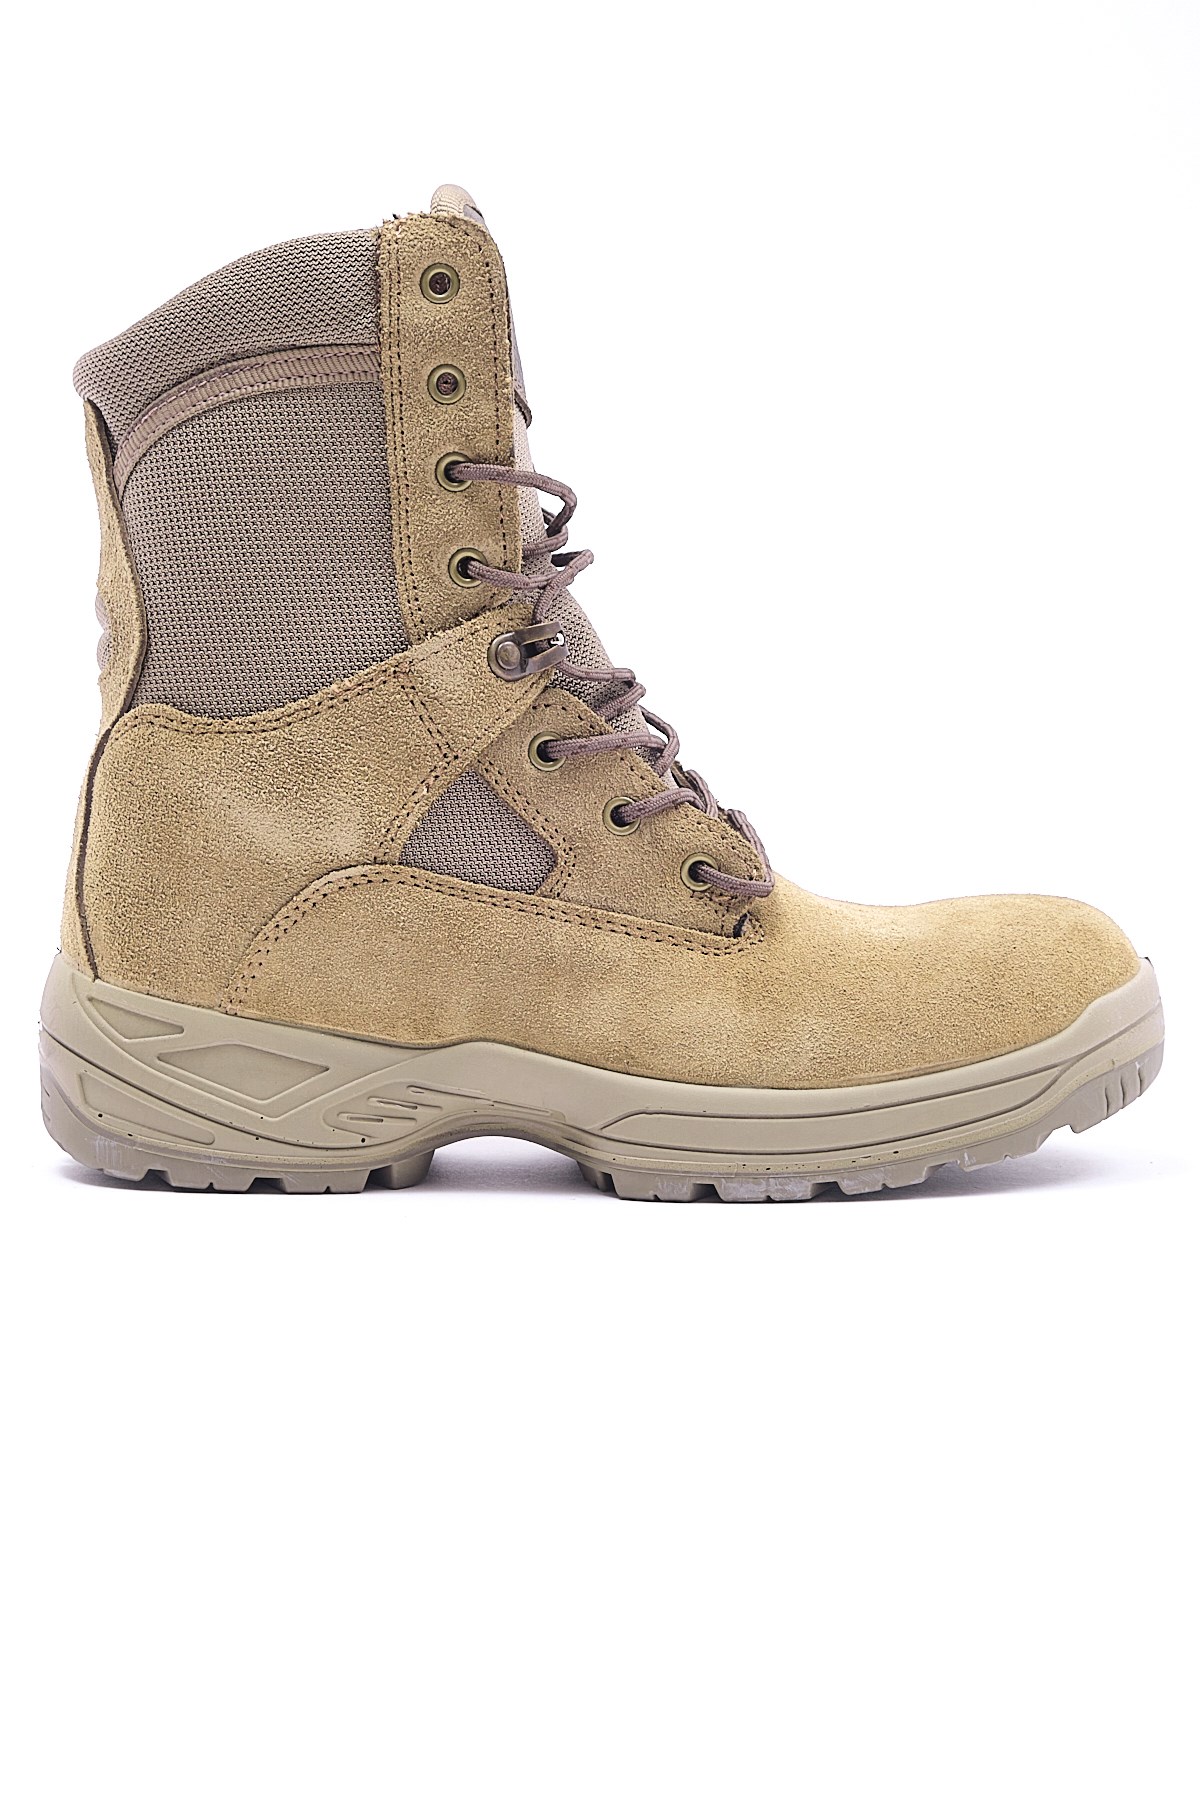 RIGEL 2080 OPERATIONAL TACTICAL MILITARY BOOT SAND SUEDE 